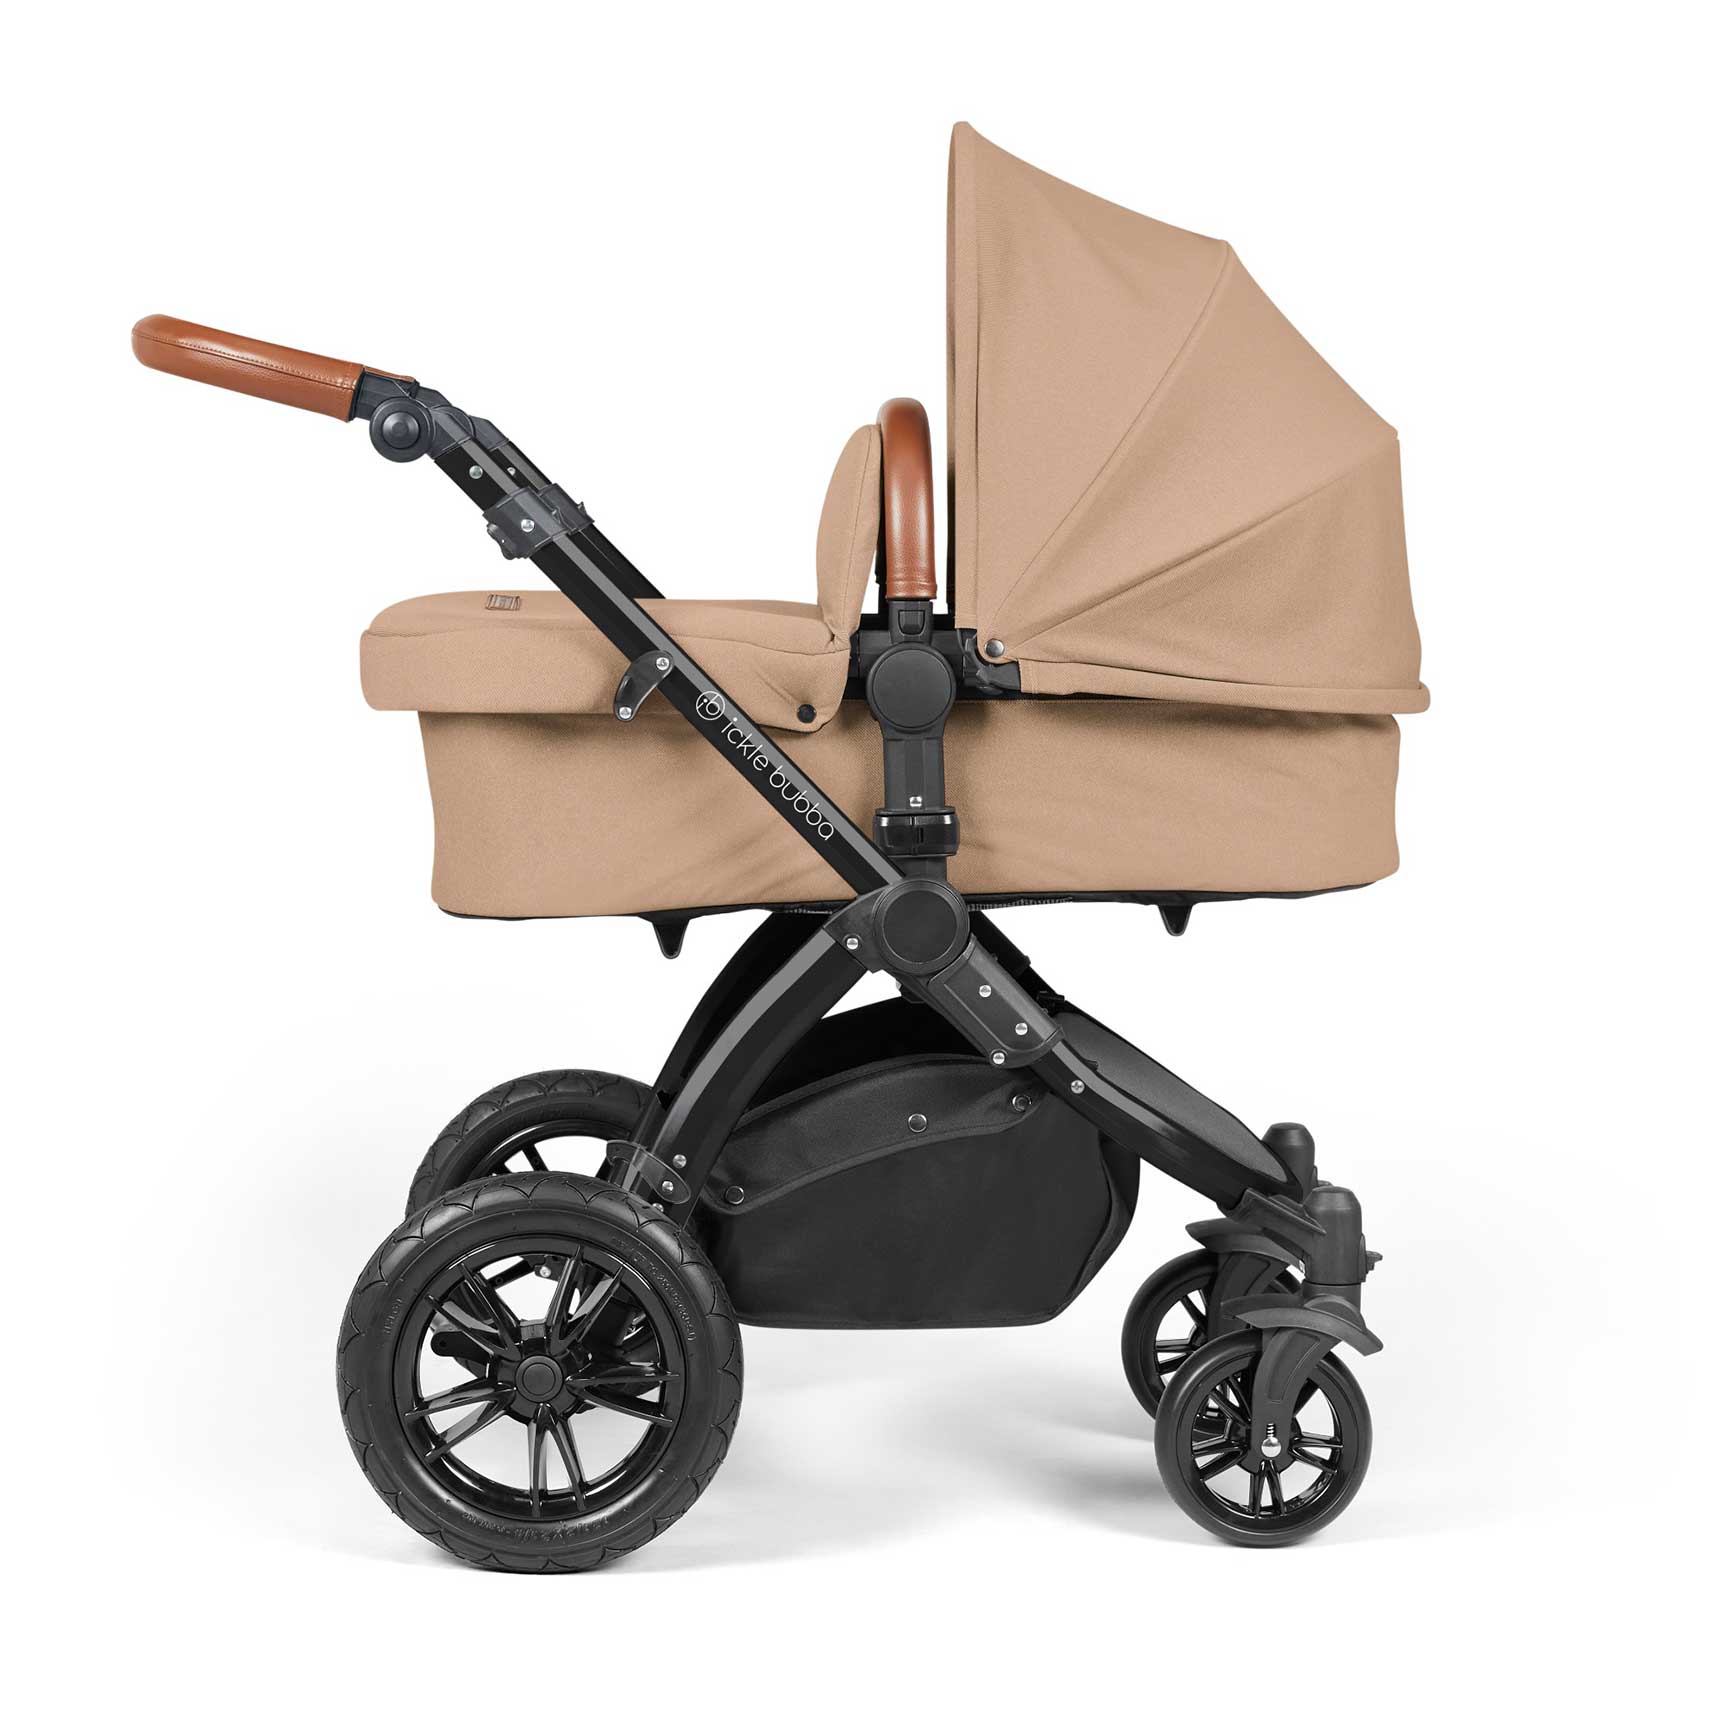 Ickle Bubba travel systems Ickle Bubba Stomp Luxe 2 in 1 Plus Pushchair & Carrycot - Black/Desert/Tan 10-003-001-209